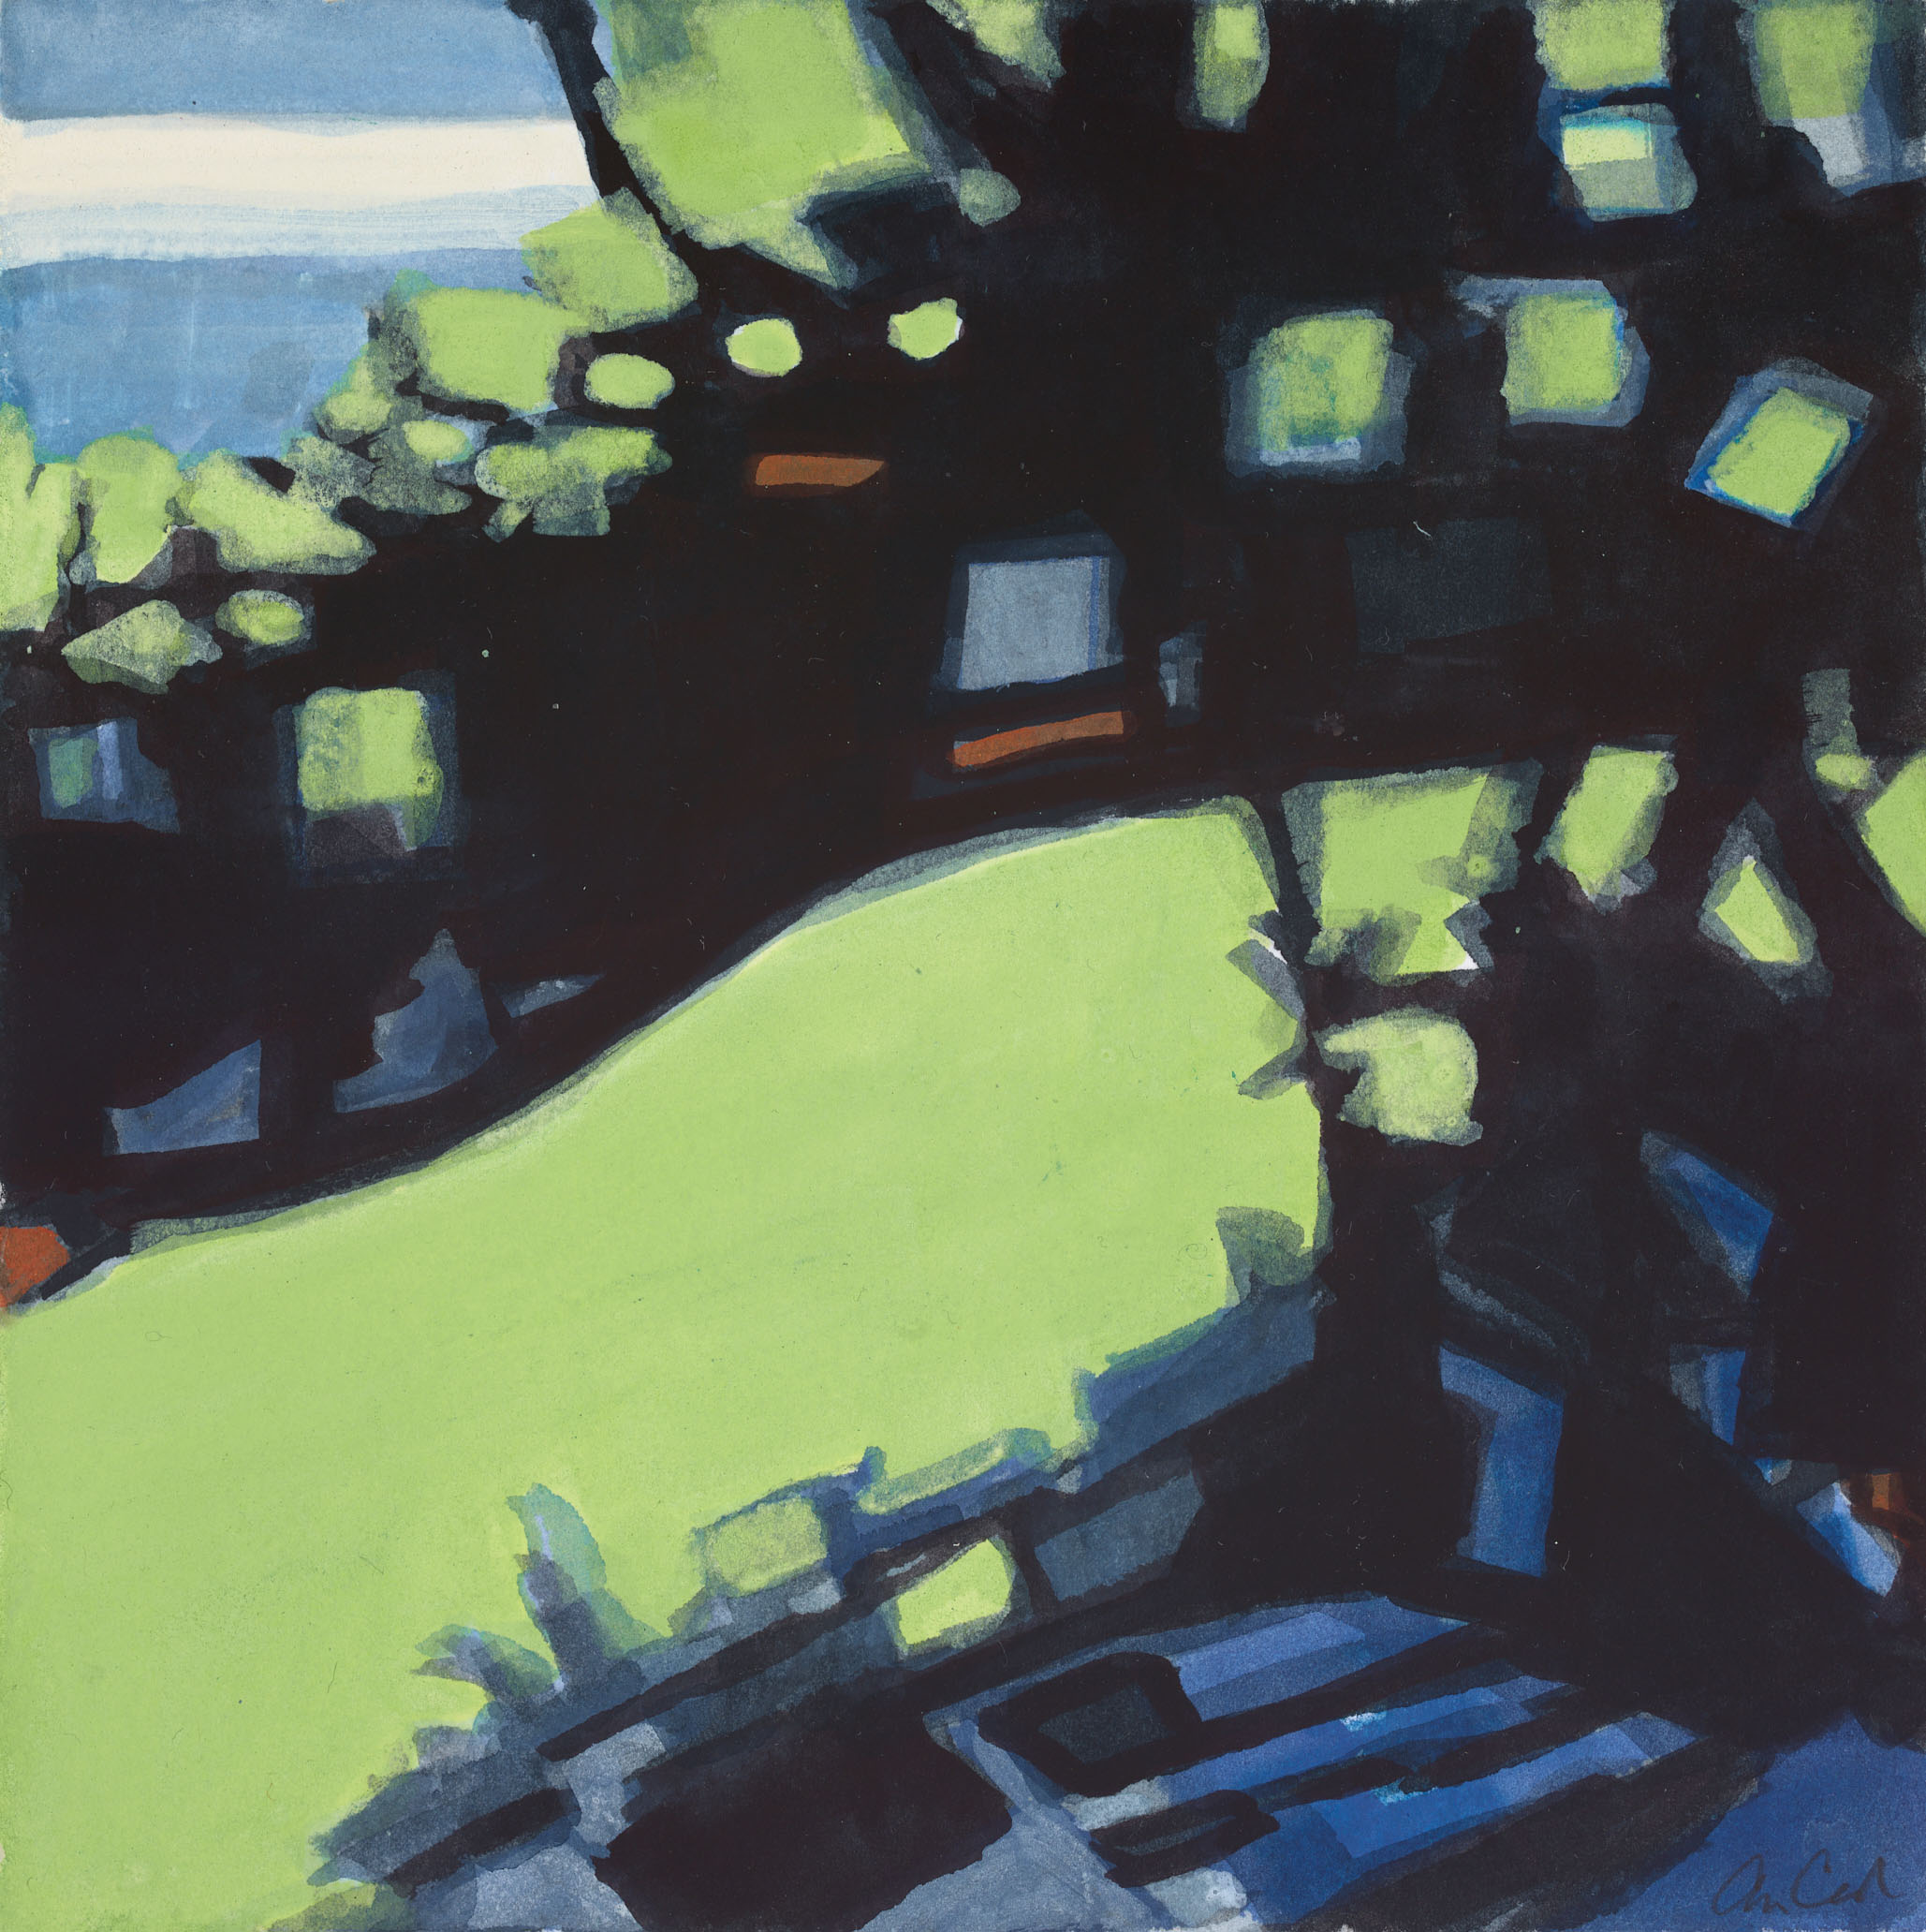 Shadows 2, 2021, mixed media on paper, 8 x 8 inches